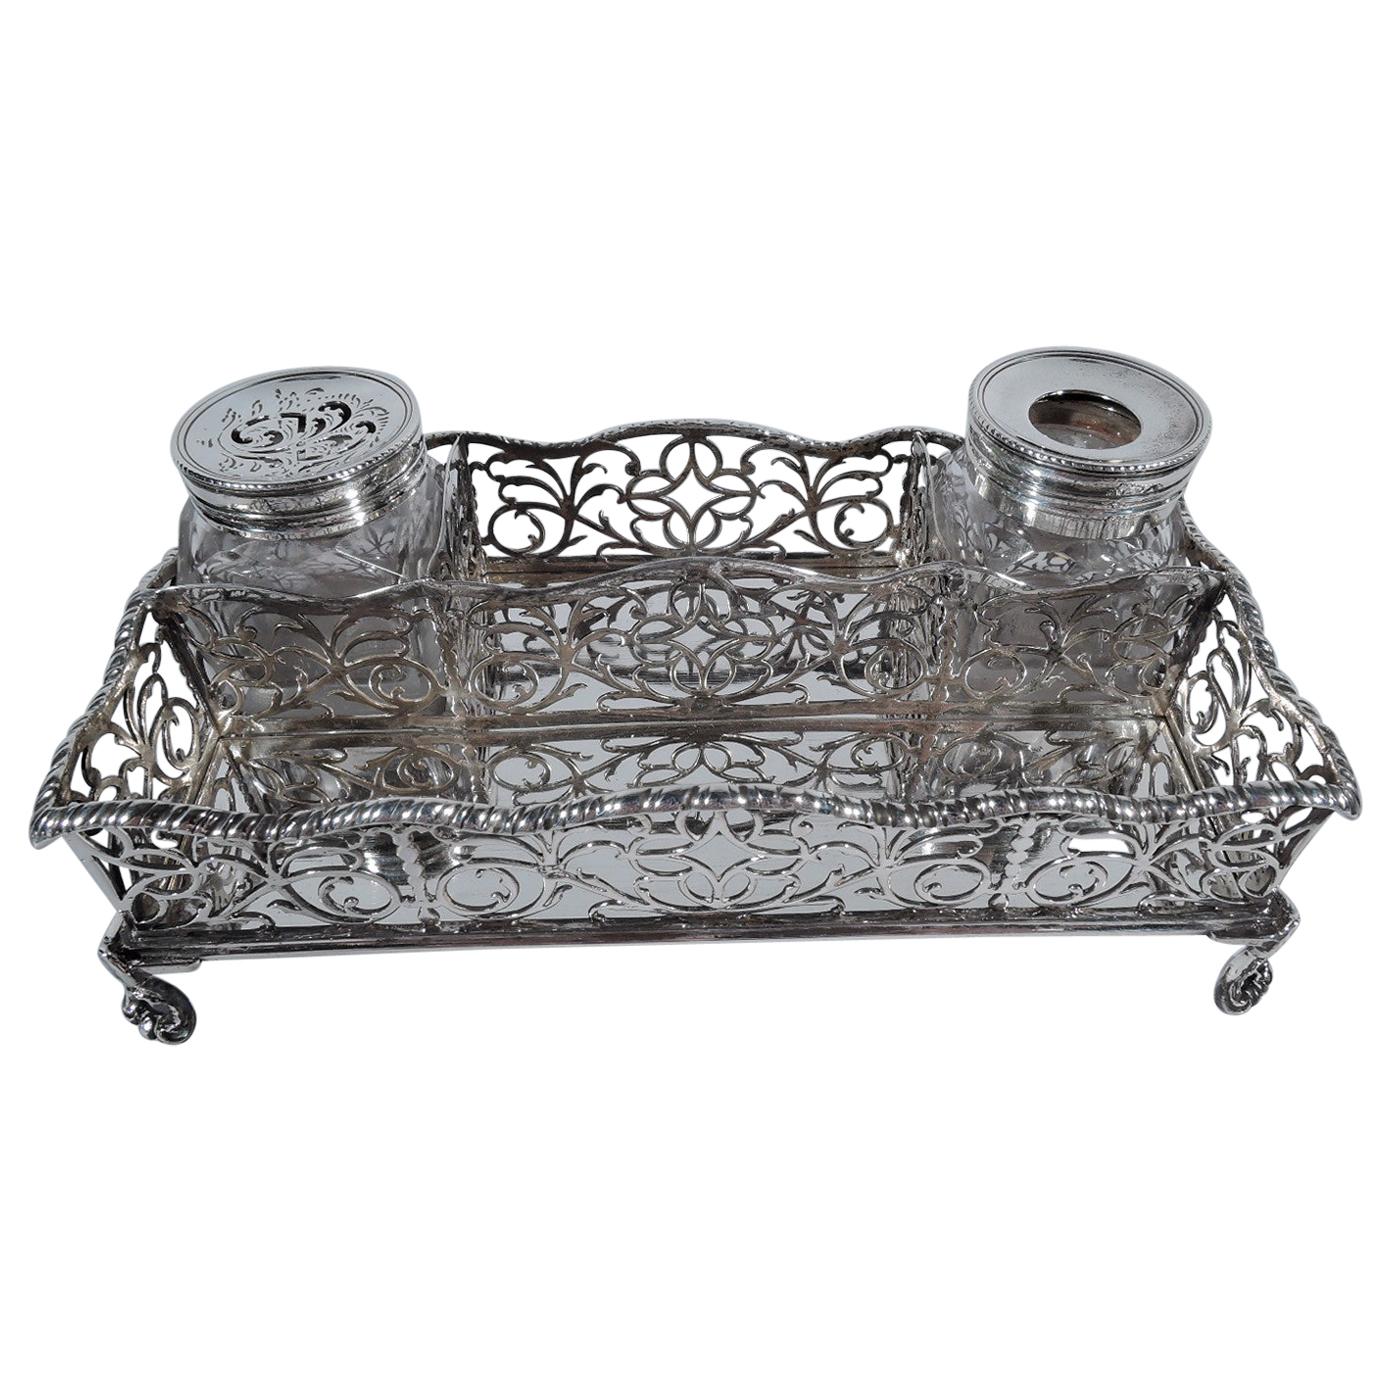 Antique English Georgian Sterling Silver Inkstand by William Plummer